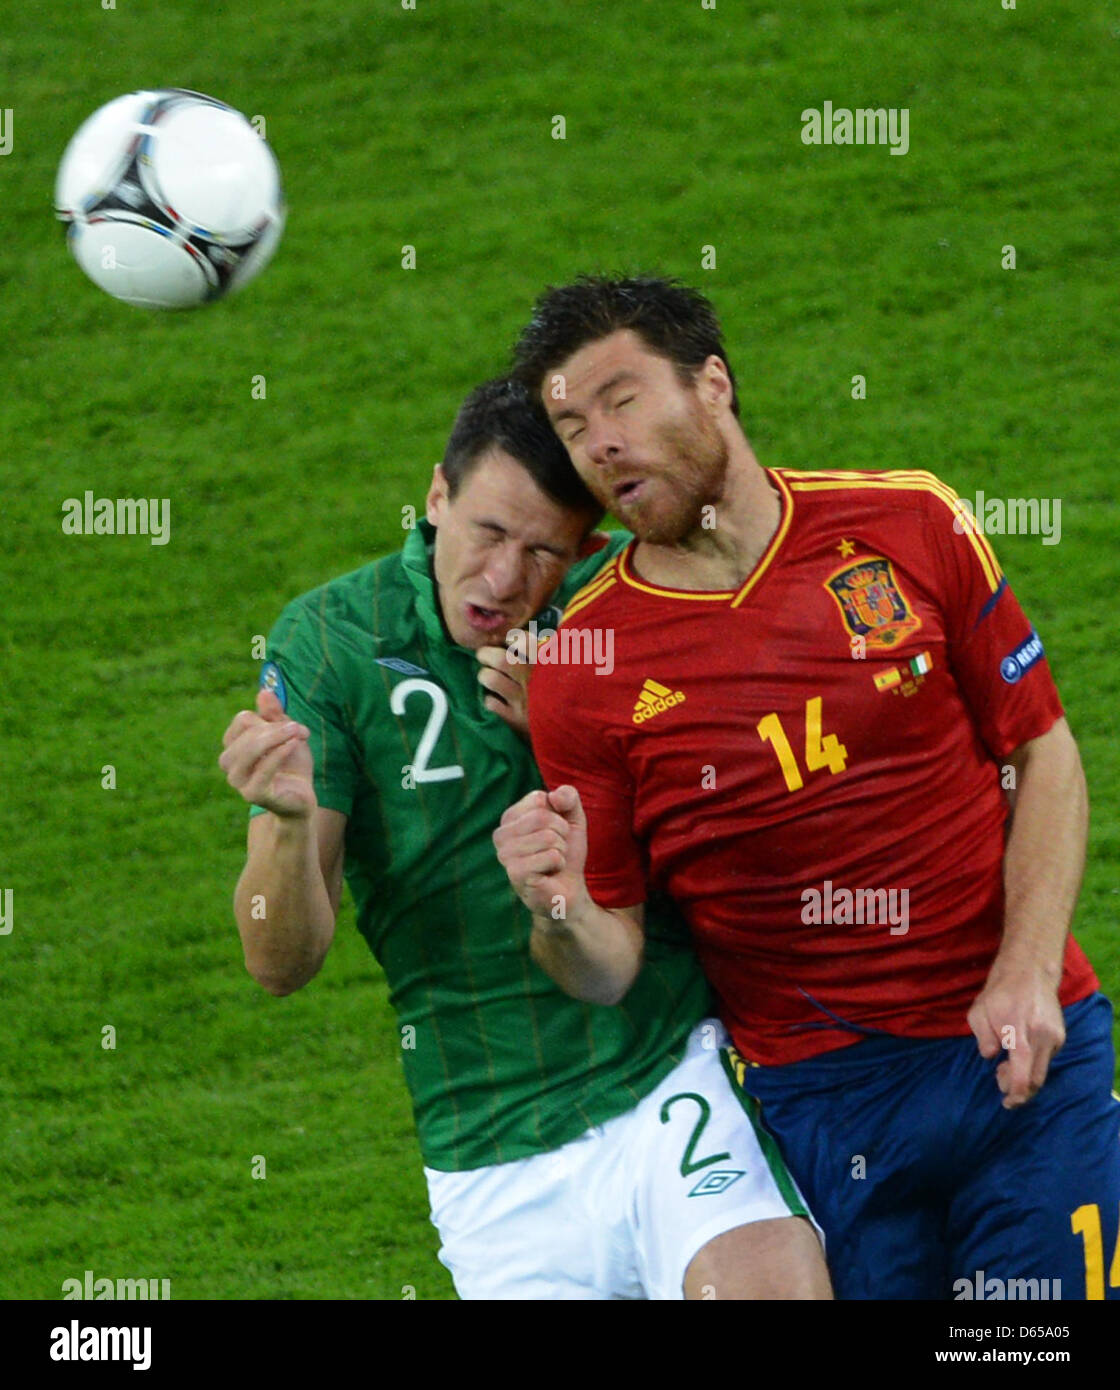 Spain's Xabi Alonso (R) and Ireland's Sean St Ledger vie for the ball during the UEFA EURO 2012 group C soccer match Spain vs Republic of Ireland at Arena Gdansk in Gdansk, Poland, 14 June 2012. Photo: Marcus Brandt dpa (Please refer to chapters 7 and 8 of http://dpaq.de/Ziovh for UEFA Euro 2012 Terms & Conditions)  +++(c) dpa - Bildfunk+++ Stock Photo